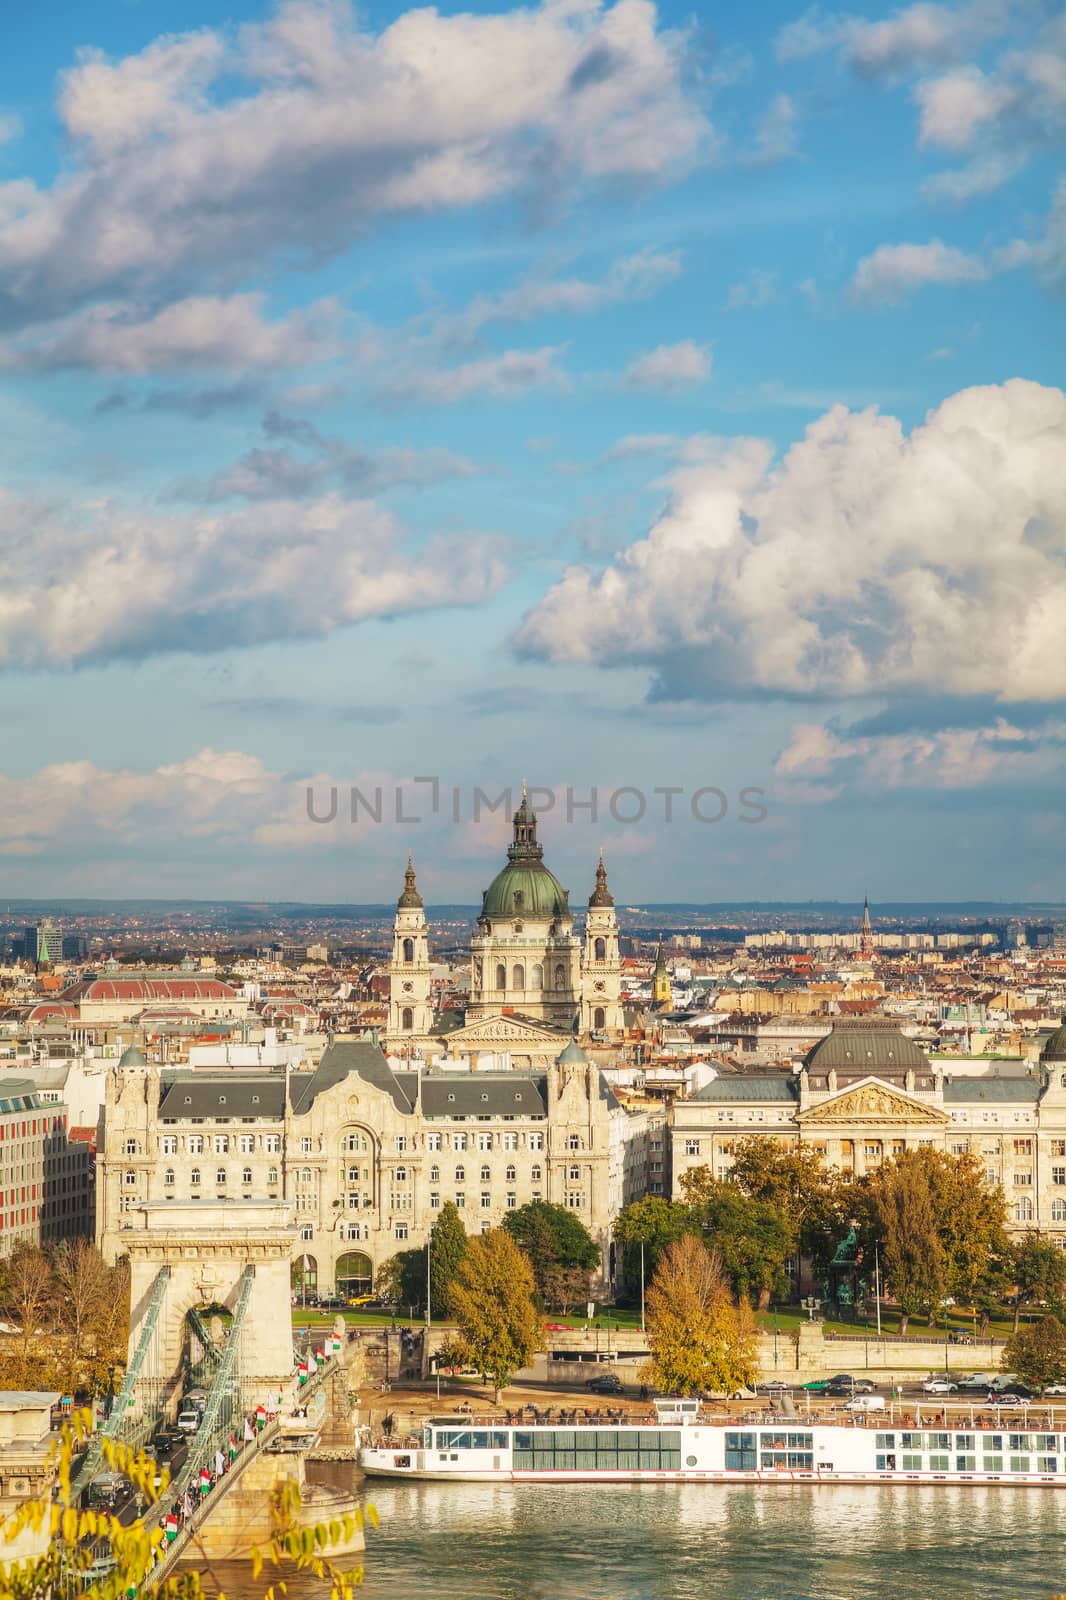 Overview of Budapest on a cloudy day by AndreyKr